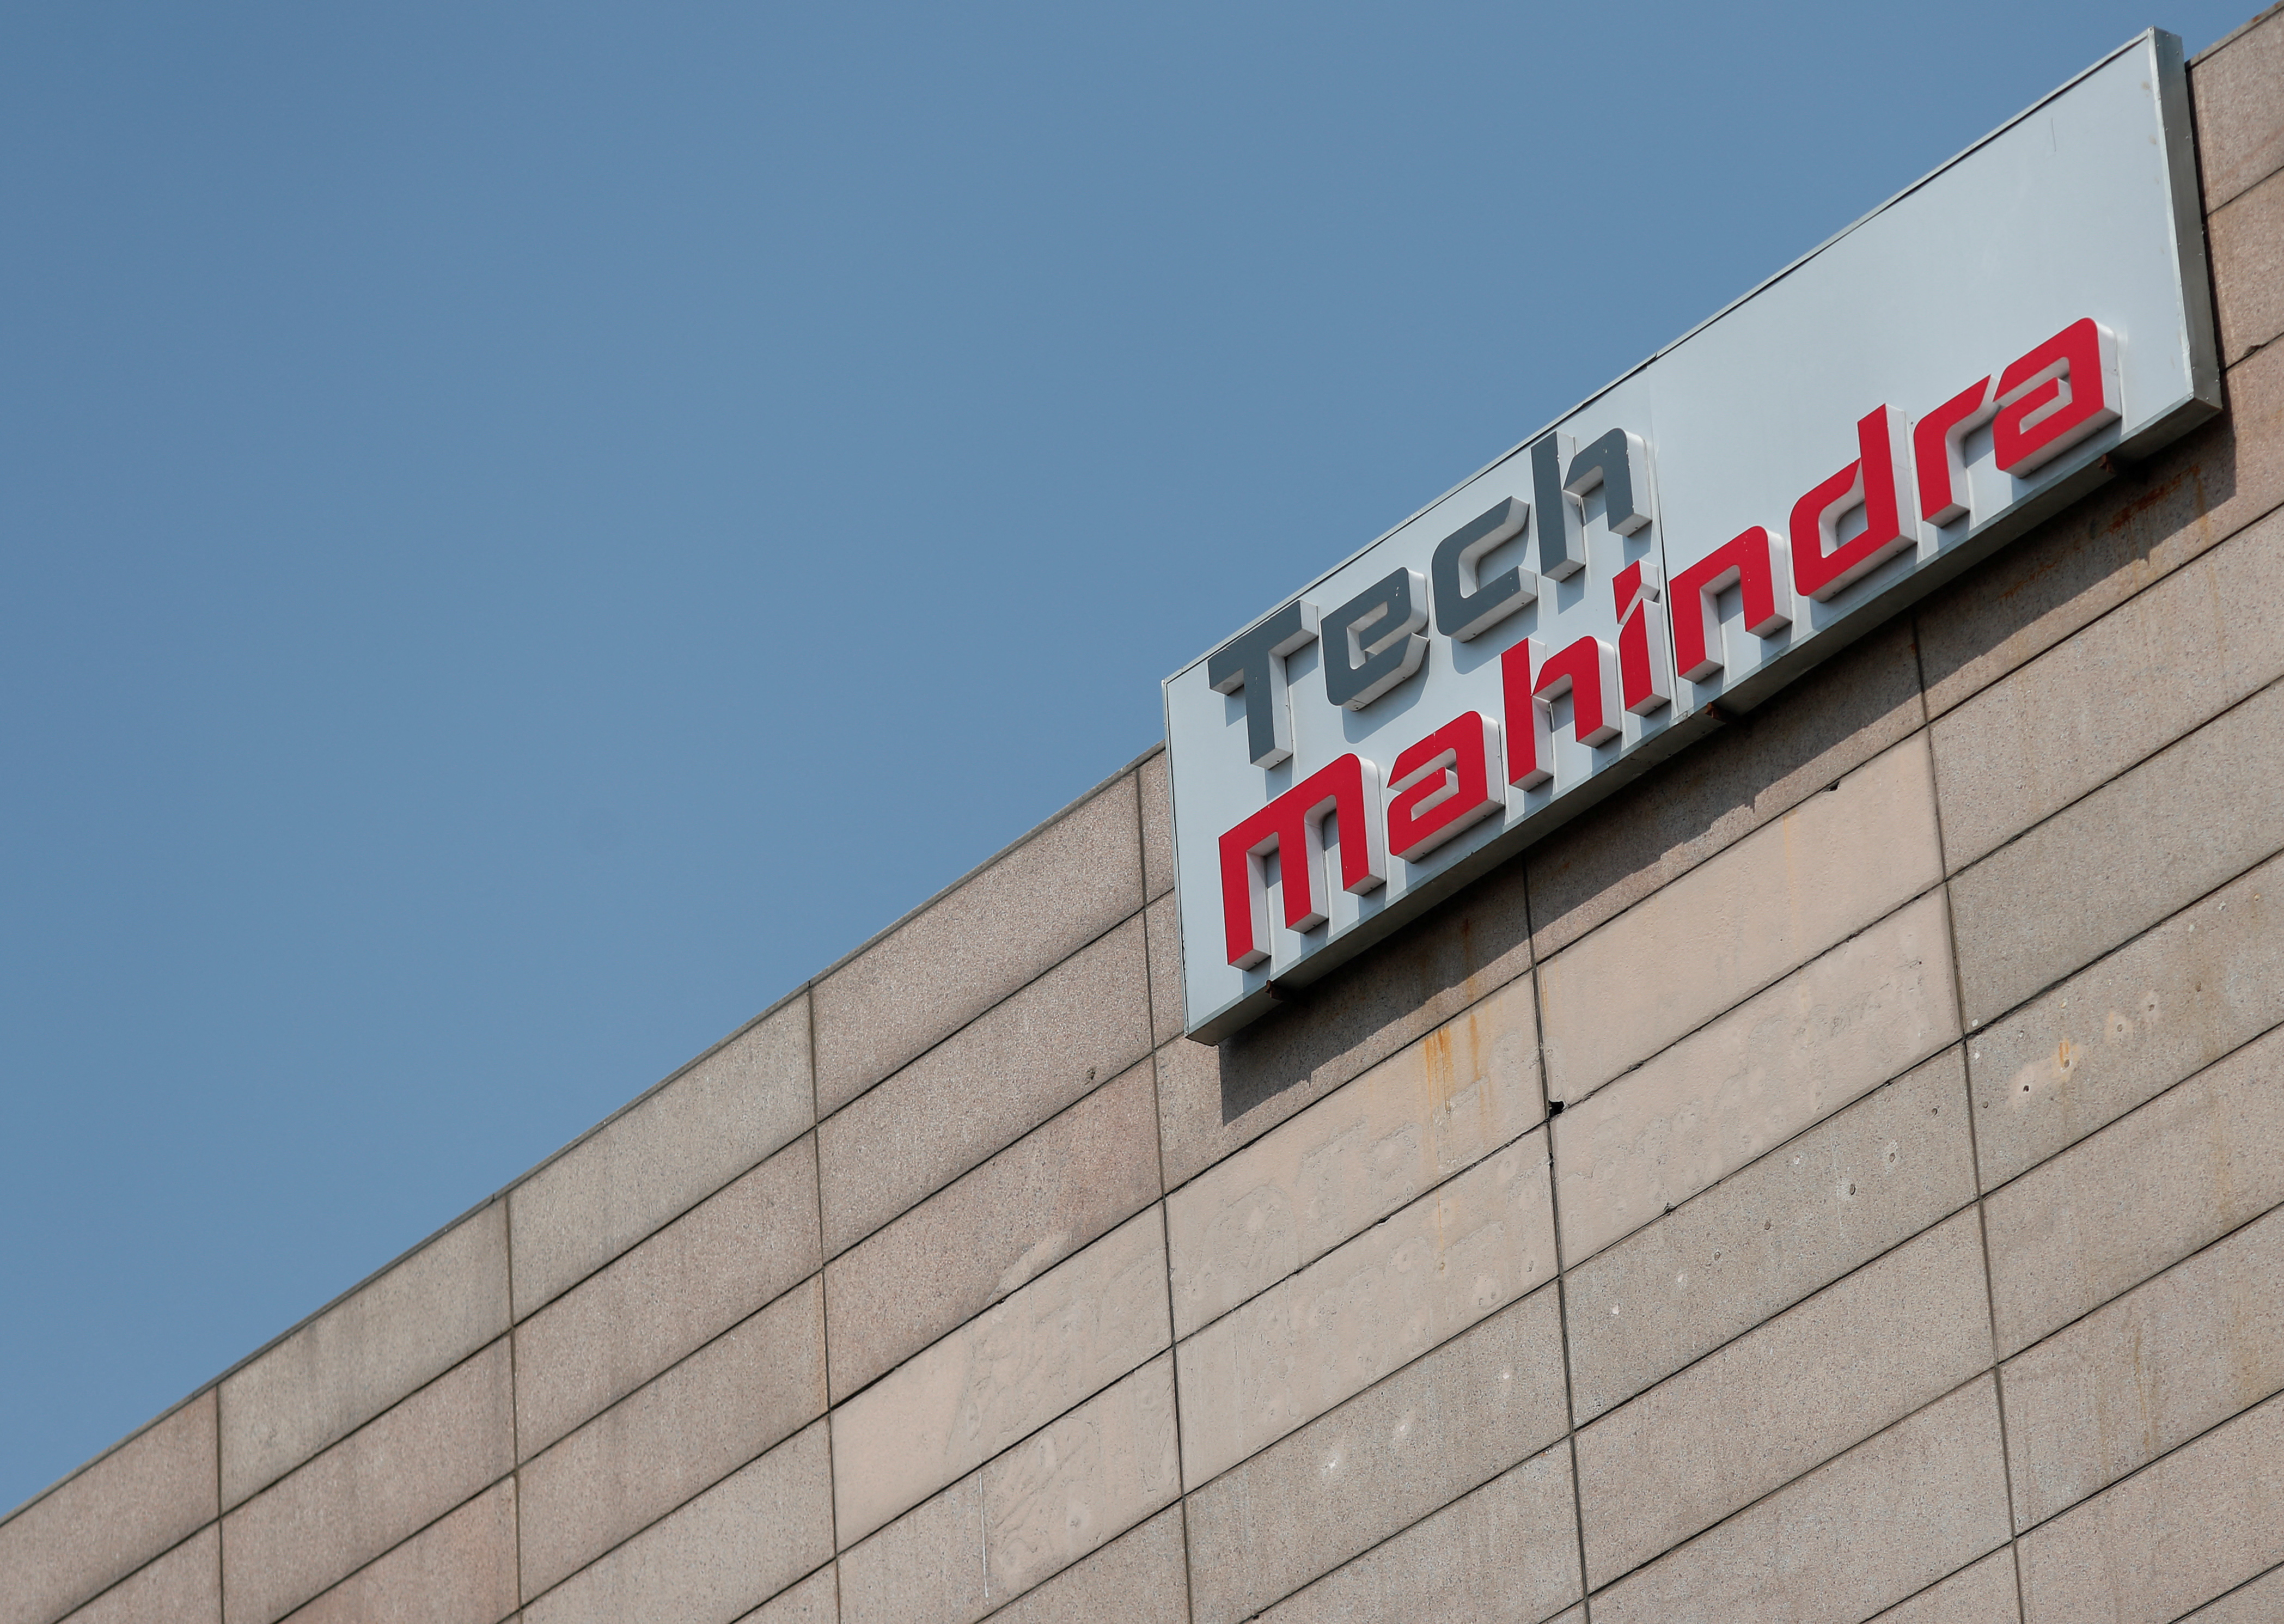 Tech Mahindra logo is seen on its office building in Noida